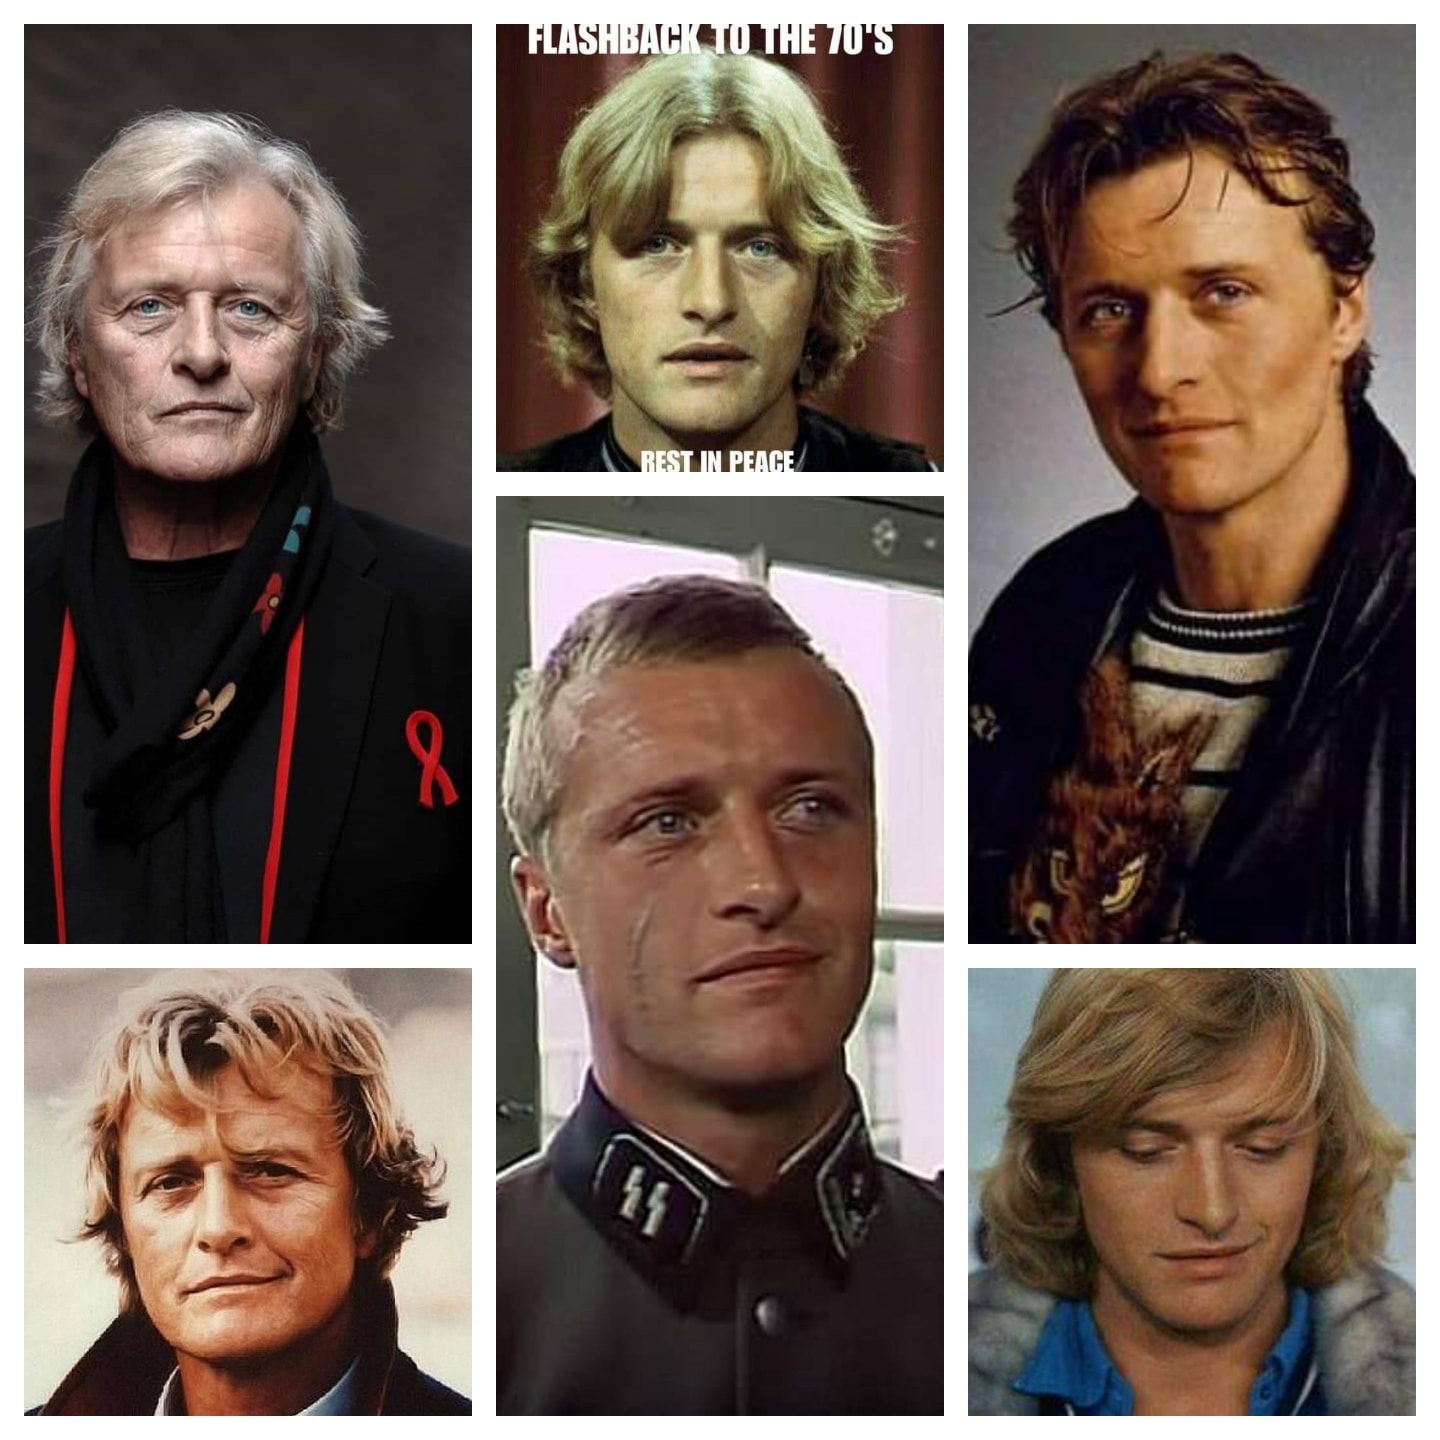 Happy Birthday to the late Rutger Hauer
(Jan 23, 1944 - Jul 19, 2019) 